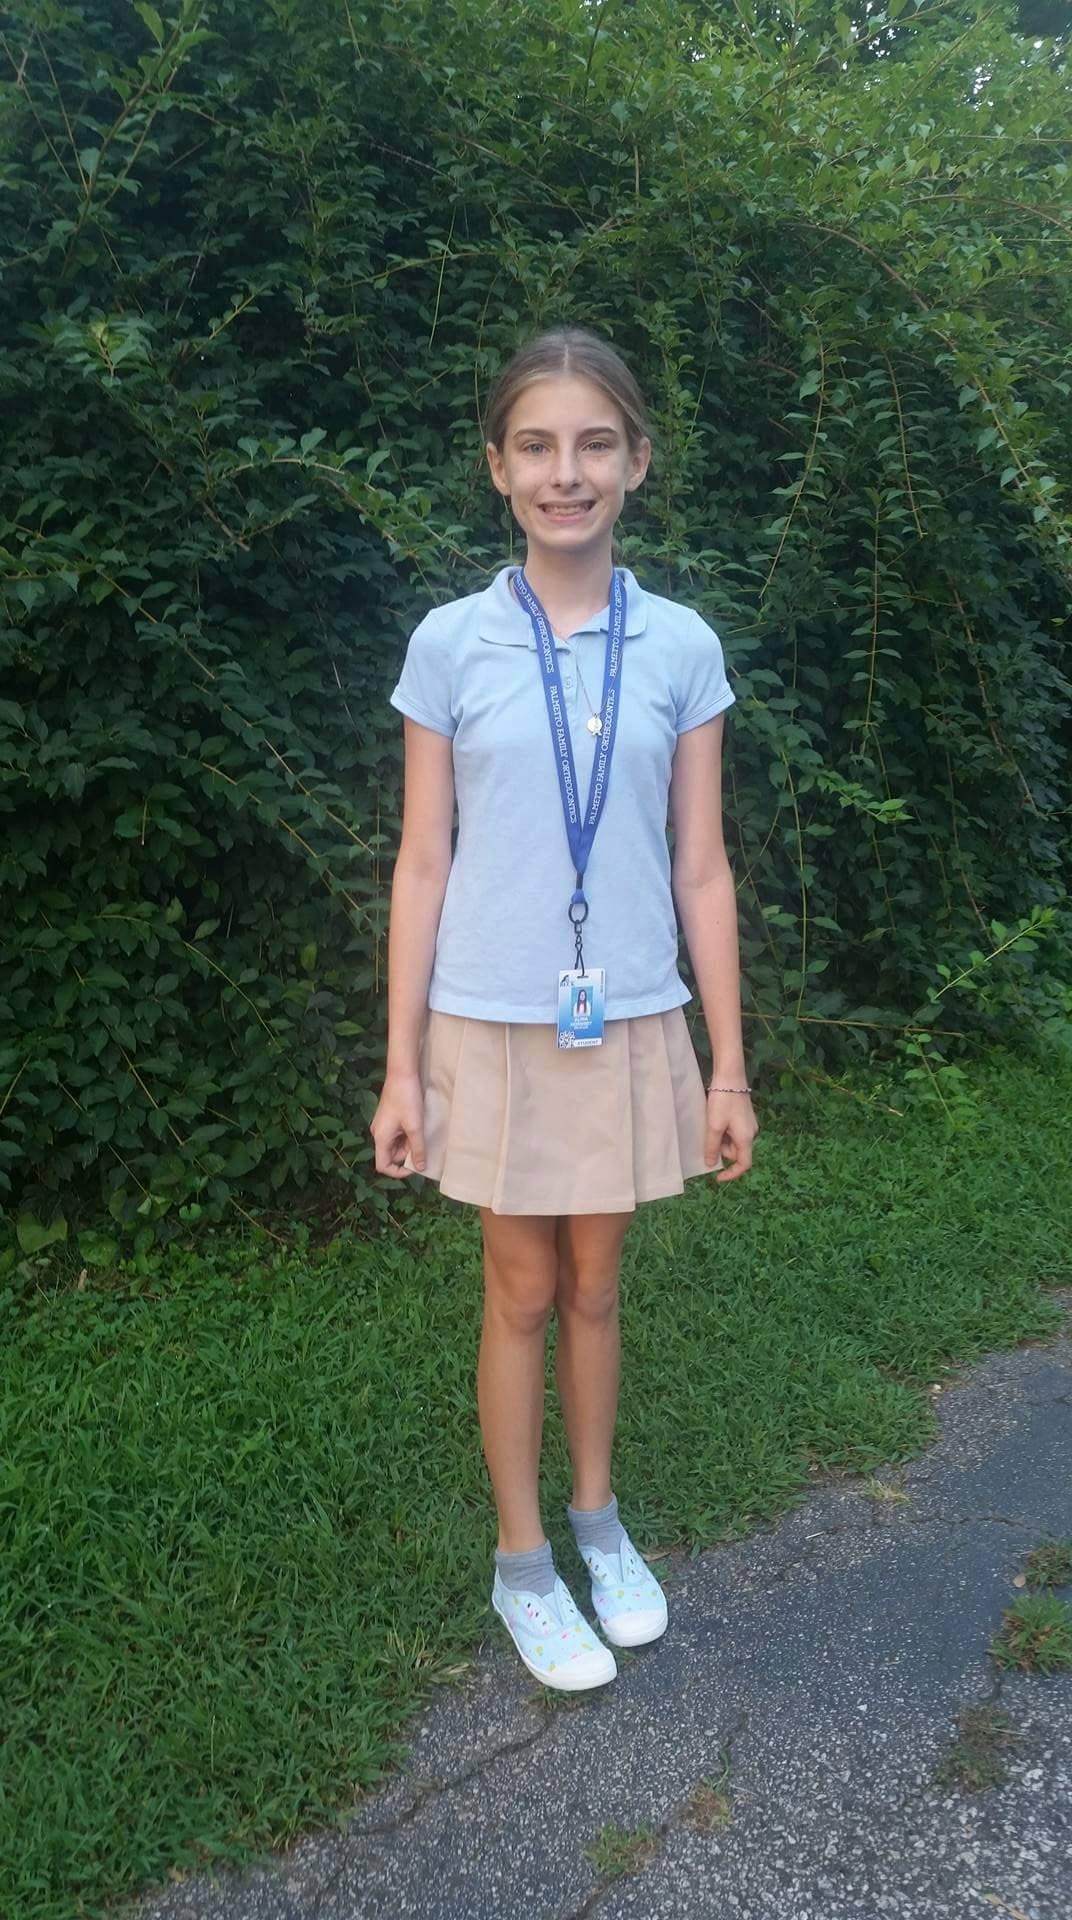 First Day of School Pictures - Photo 96